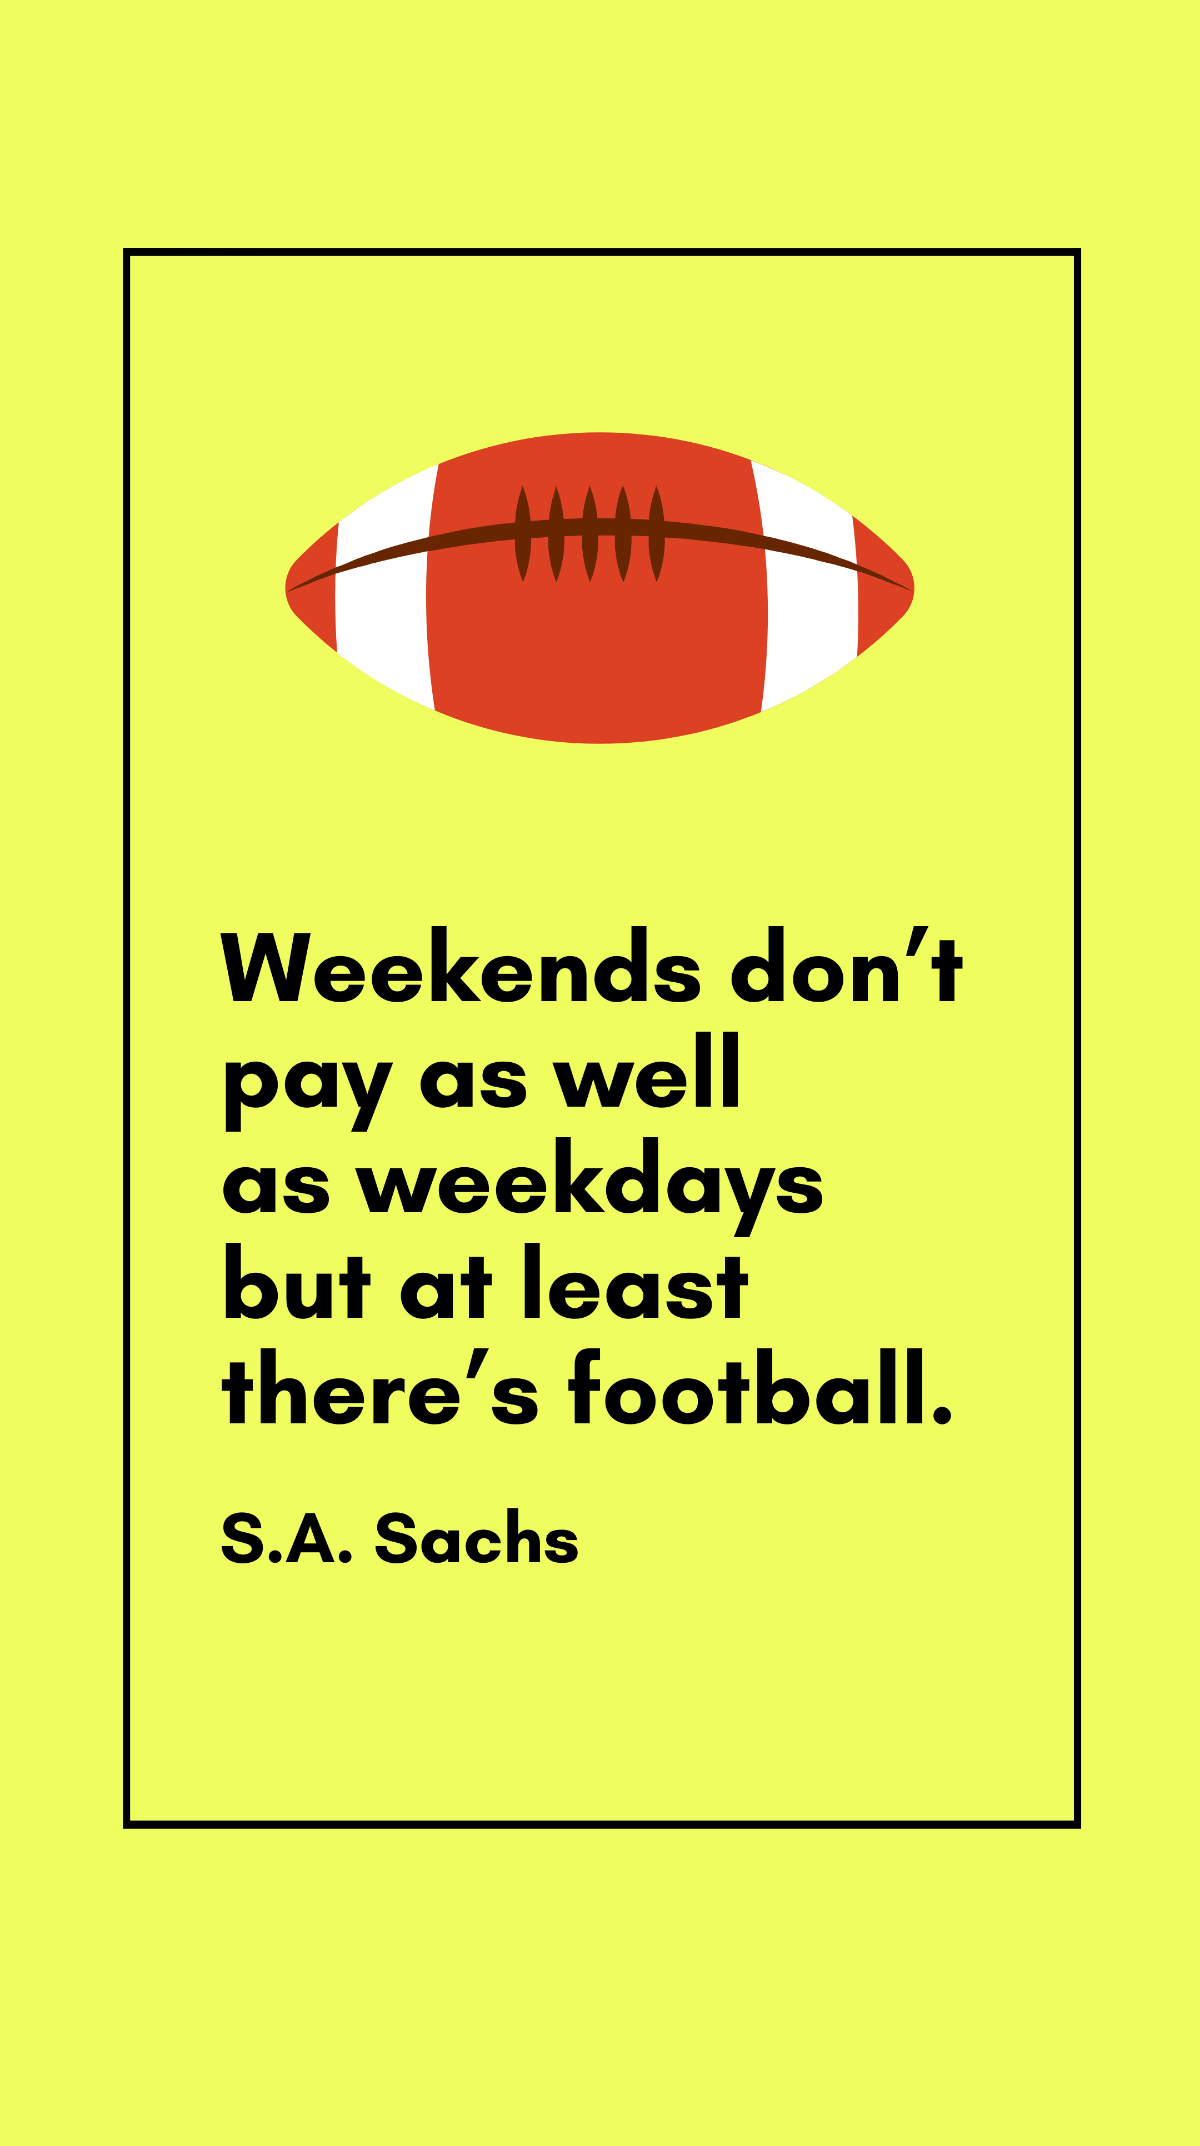 Free S.A. Sachs - Weekends don’t pay as well as weekdays but at least there’s football.  Template